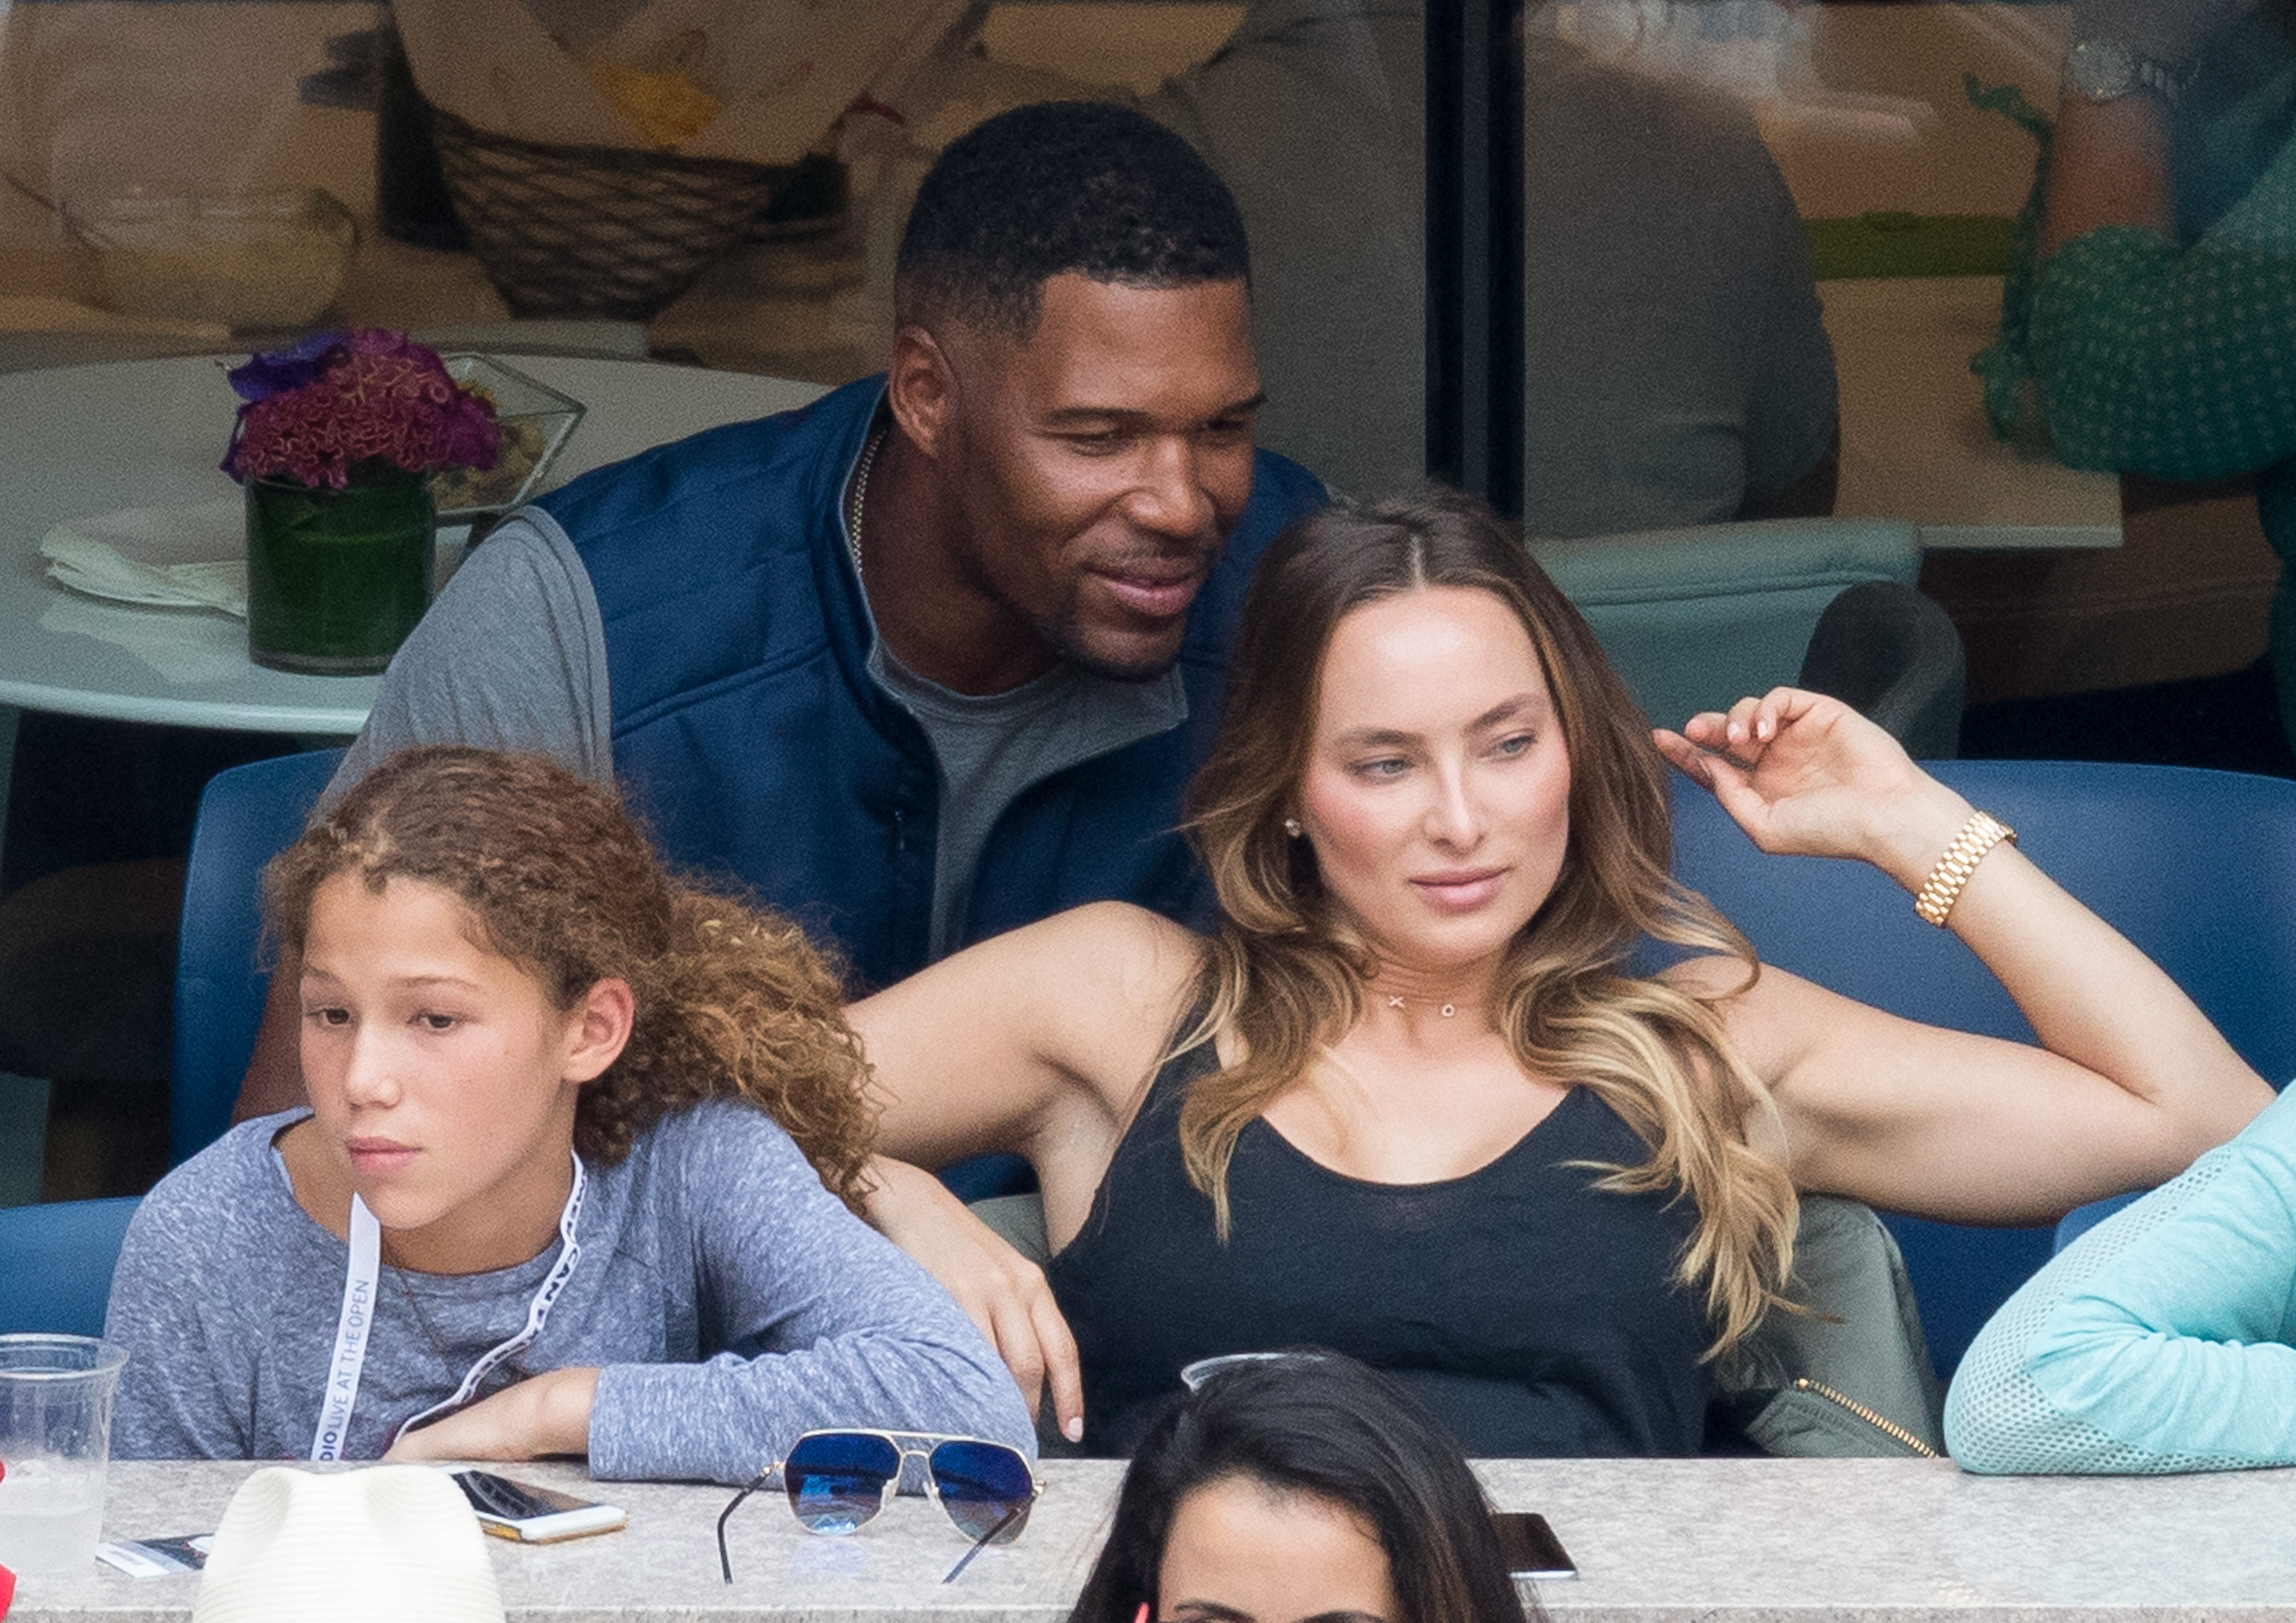 Michael Strahan with his daughter, and Kayla Quick attend the 2016 US Open in New York City on September 5, 2016 | Source: Getty Images